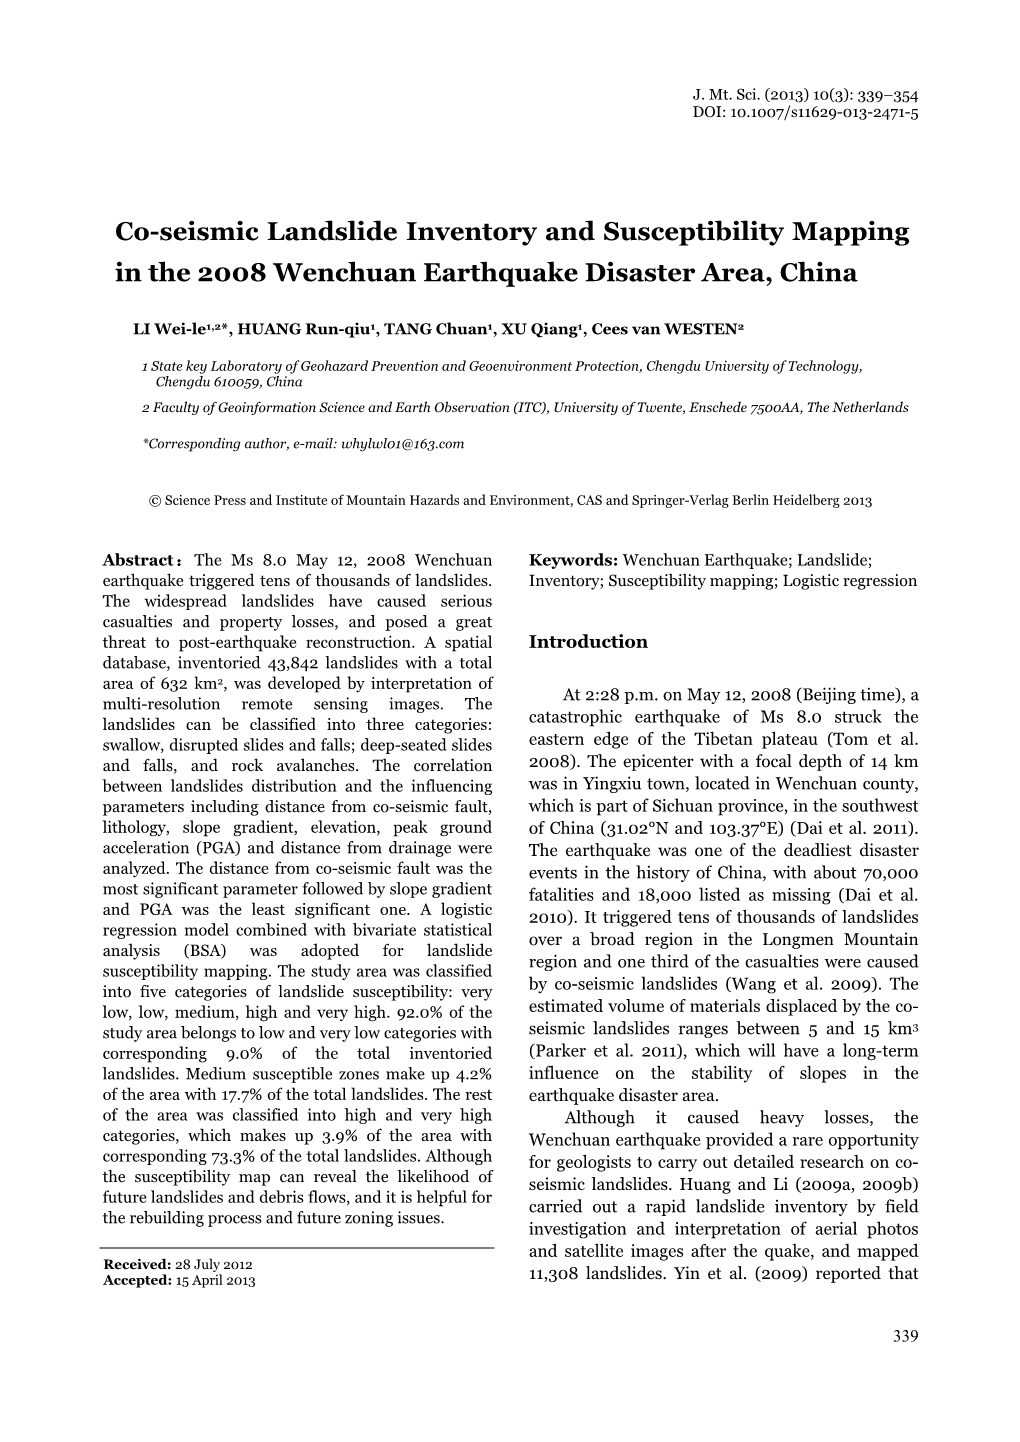 Co-Seismic Landslide Inventory and Susceptibility Mapping in the 2008 Wenchuan Earthquake Disaster Area, China